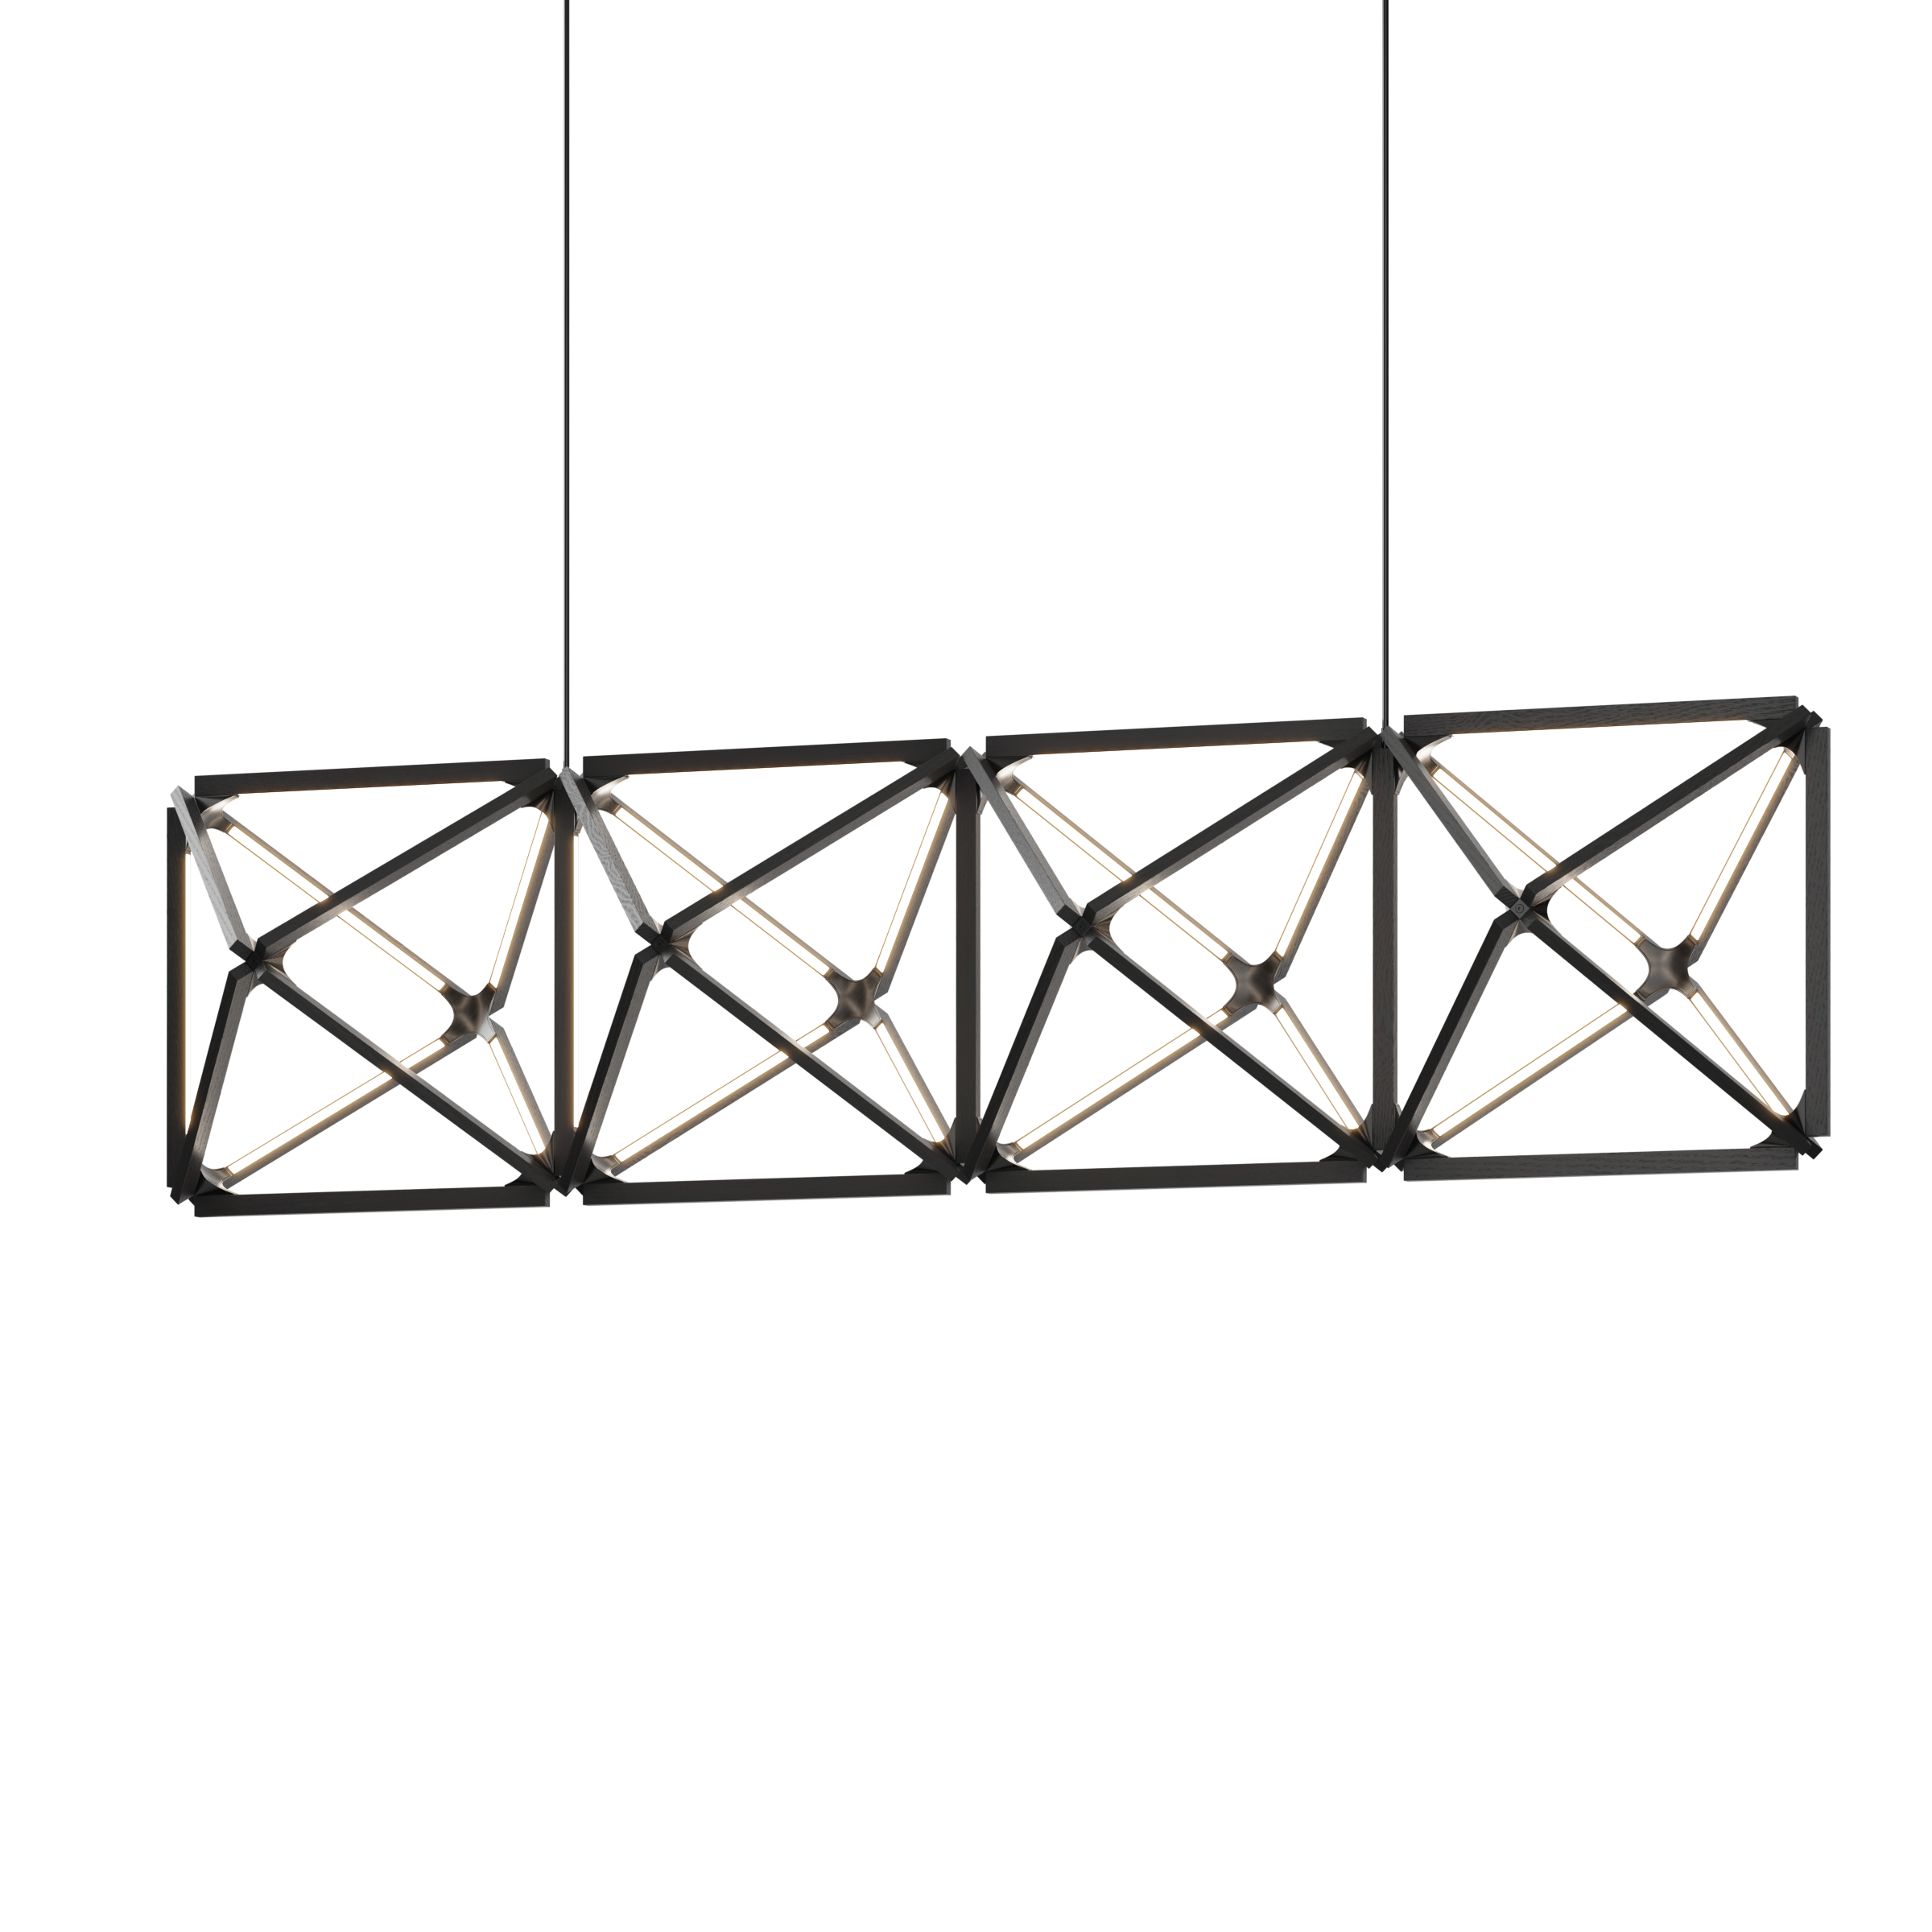 Image of a Stickbulb Truss lighting fixture. The modern fixture consists of sleek wooden beams with multiple integrated LED bulbs.